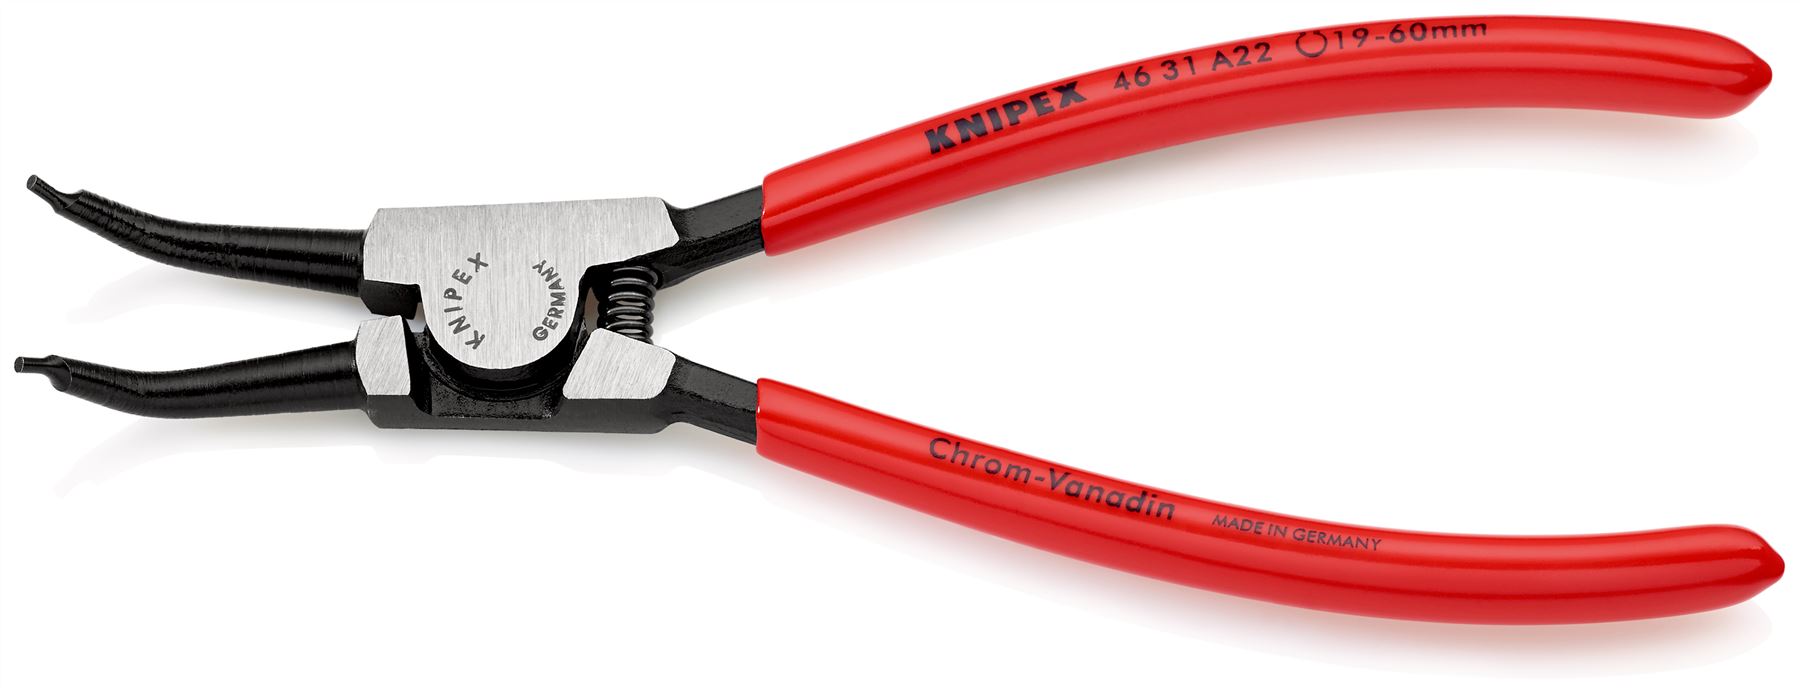 KNIPEX Circlip Pliers for External Circlips on Shafts 45° Angled 185mm 1.8mm Diameter Tips 46 31 A22